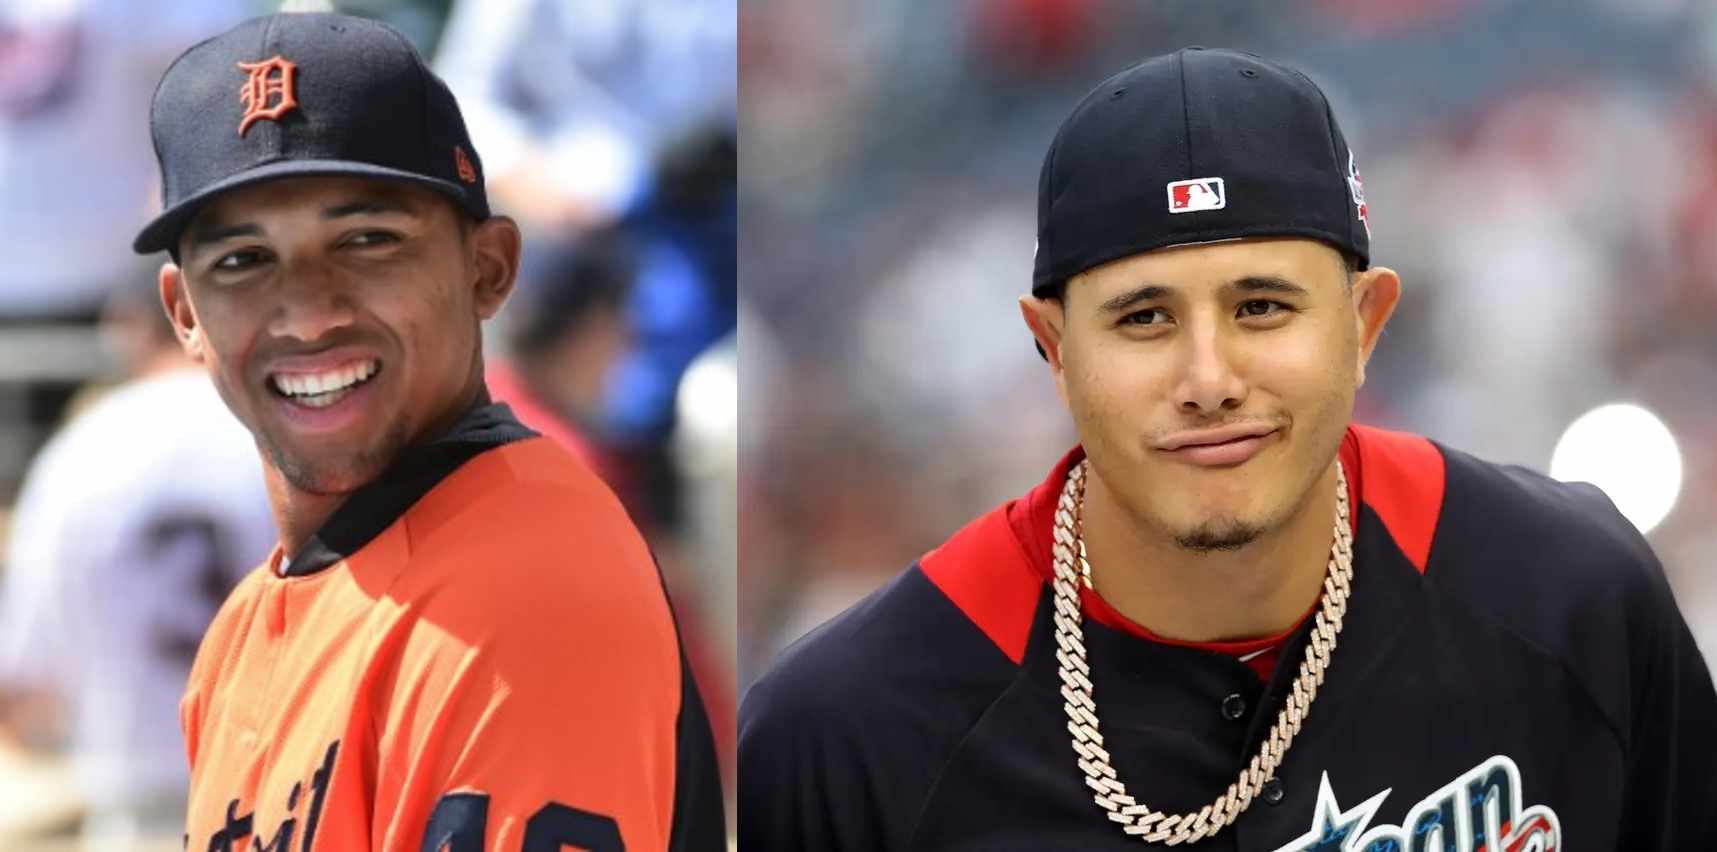 Is Baseball Player Dixon Machado Related To Manny Machado? Are They Relatives? Explained!